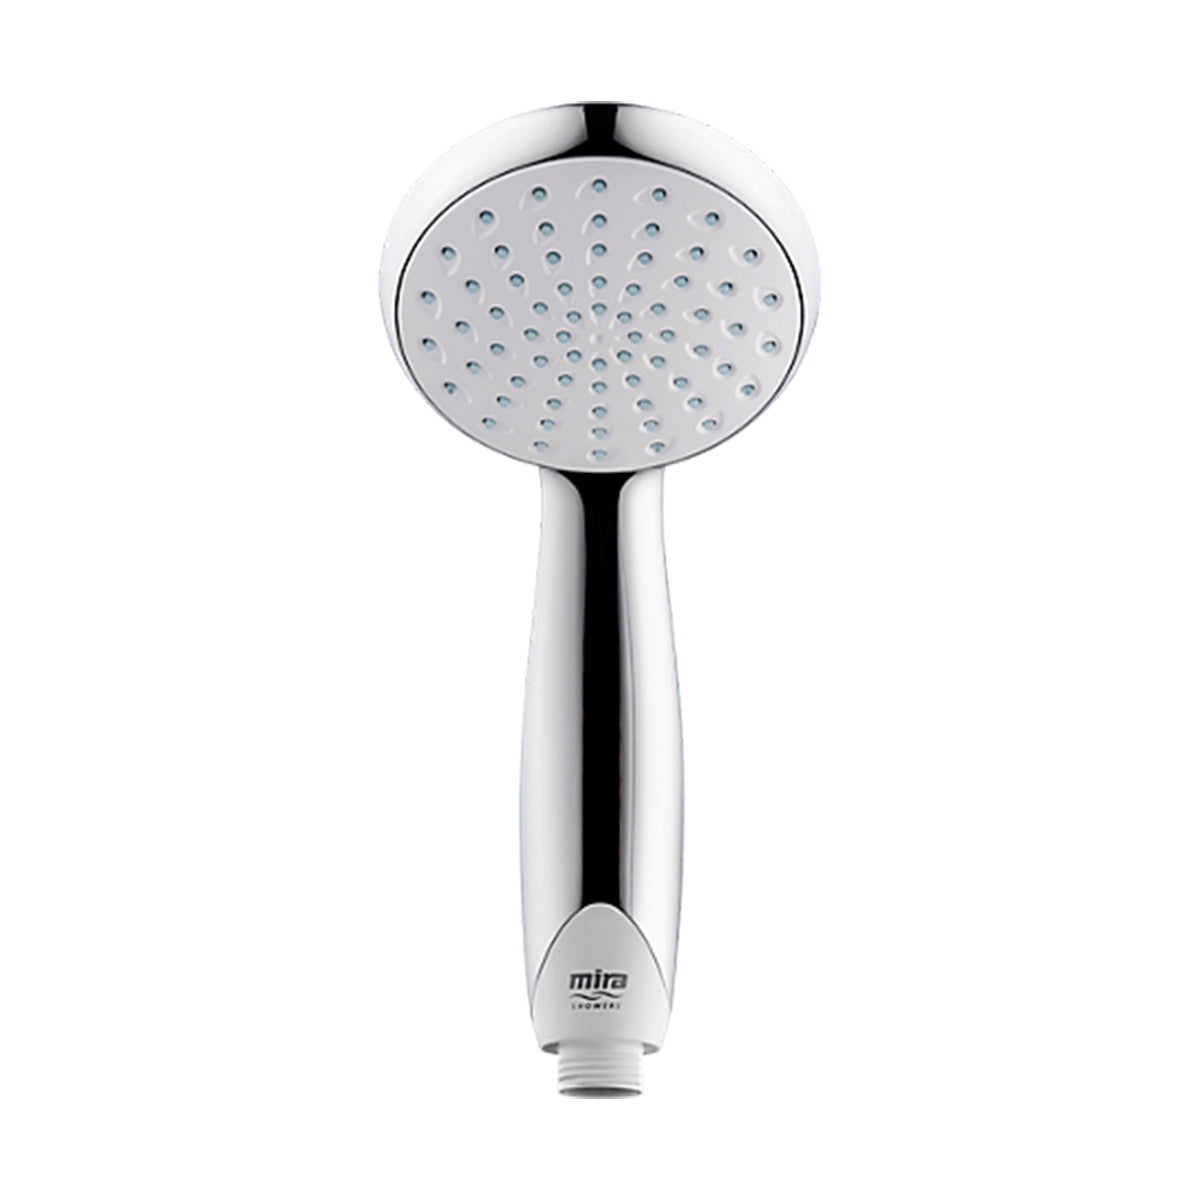 mira vigour dual outlet thermostatic shower handheld